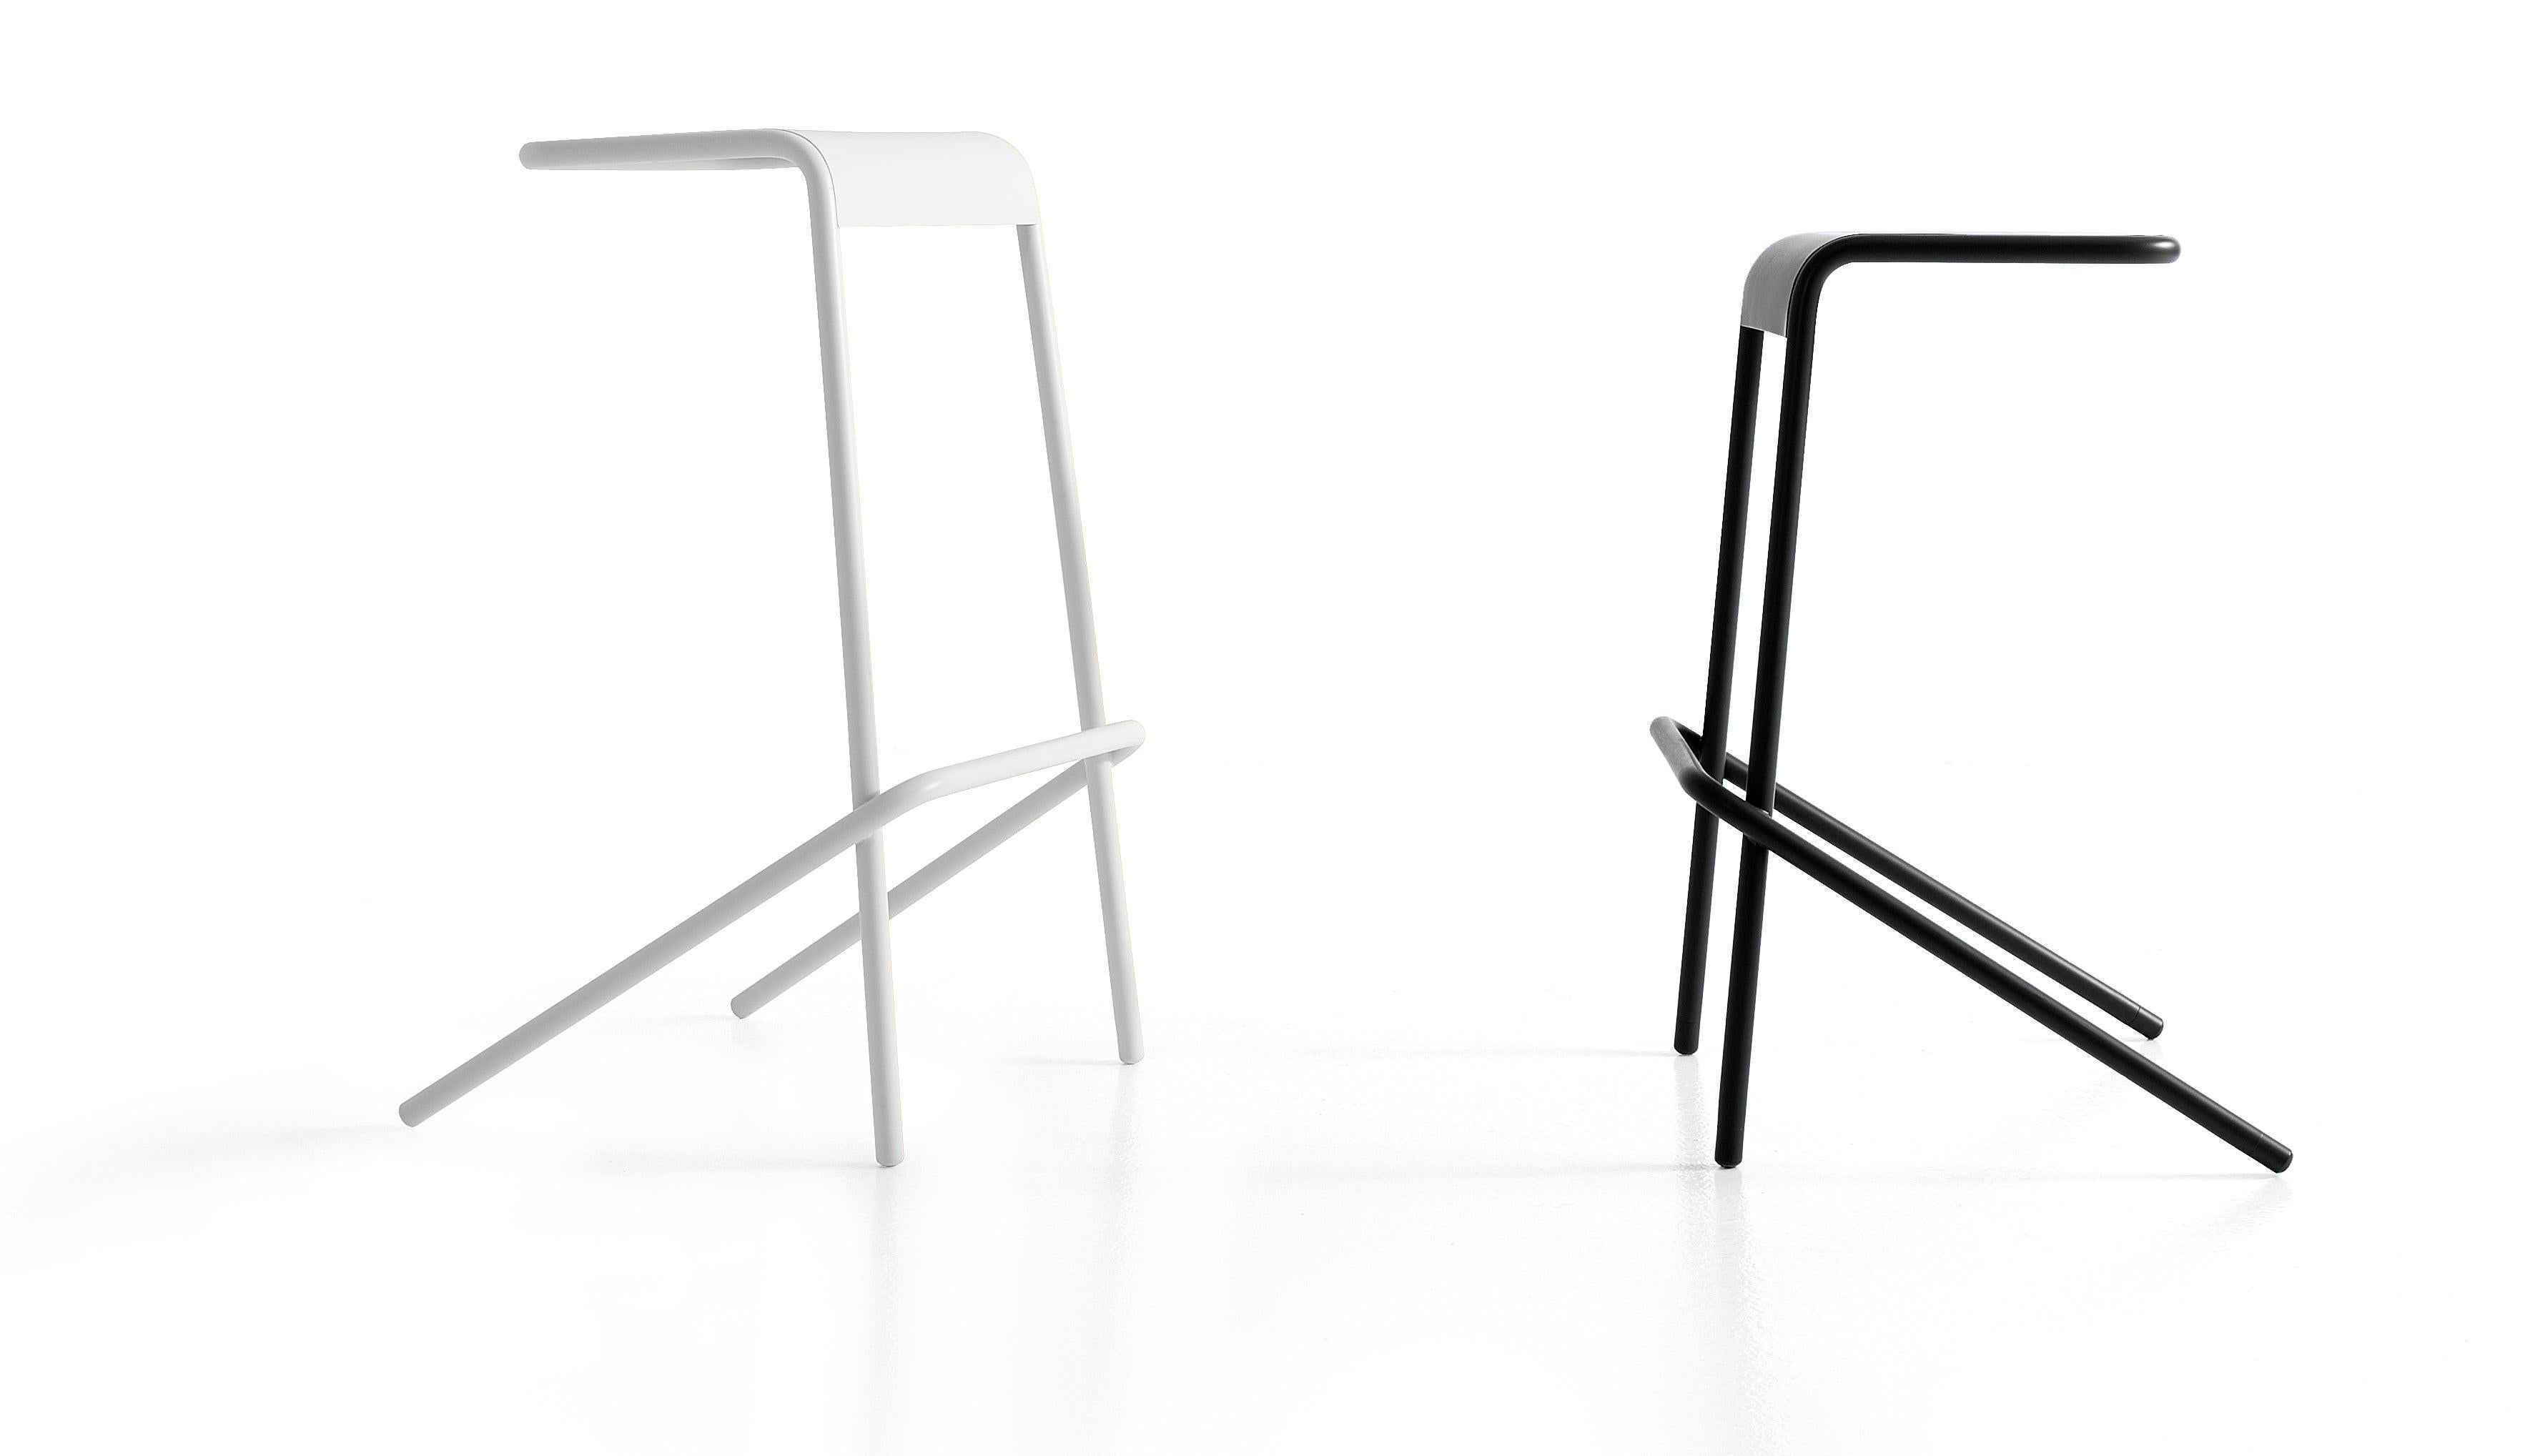 Designed by Todd Bracher, the Alodia stool is stackable and made of tubular metal, with a laser-cut sheet metal seat and feet in black plastic. Alodia is available in two heights, and comes Mattee varnished in white, mud and anthracite. Structure: